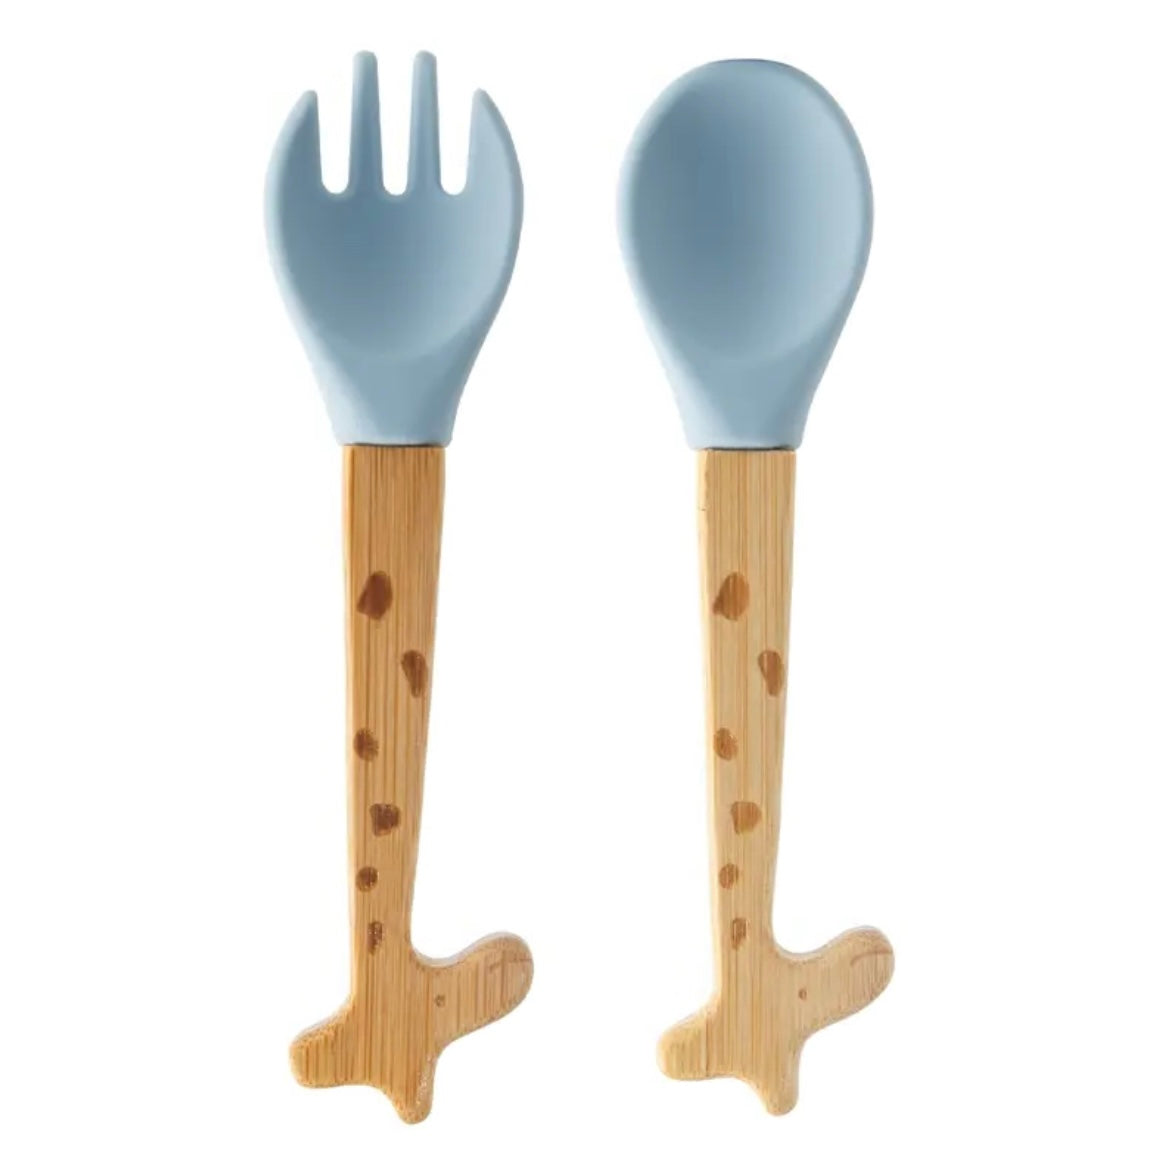 Baby Fork & Spoon Set | Blue Giraffe, shop the best gift gifts for her for him from Inna carton online store dubai, UAE!